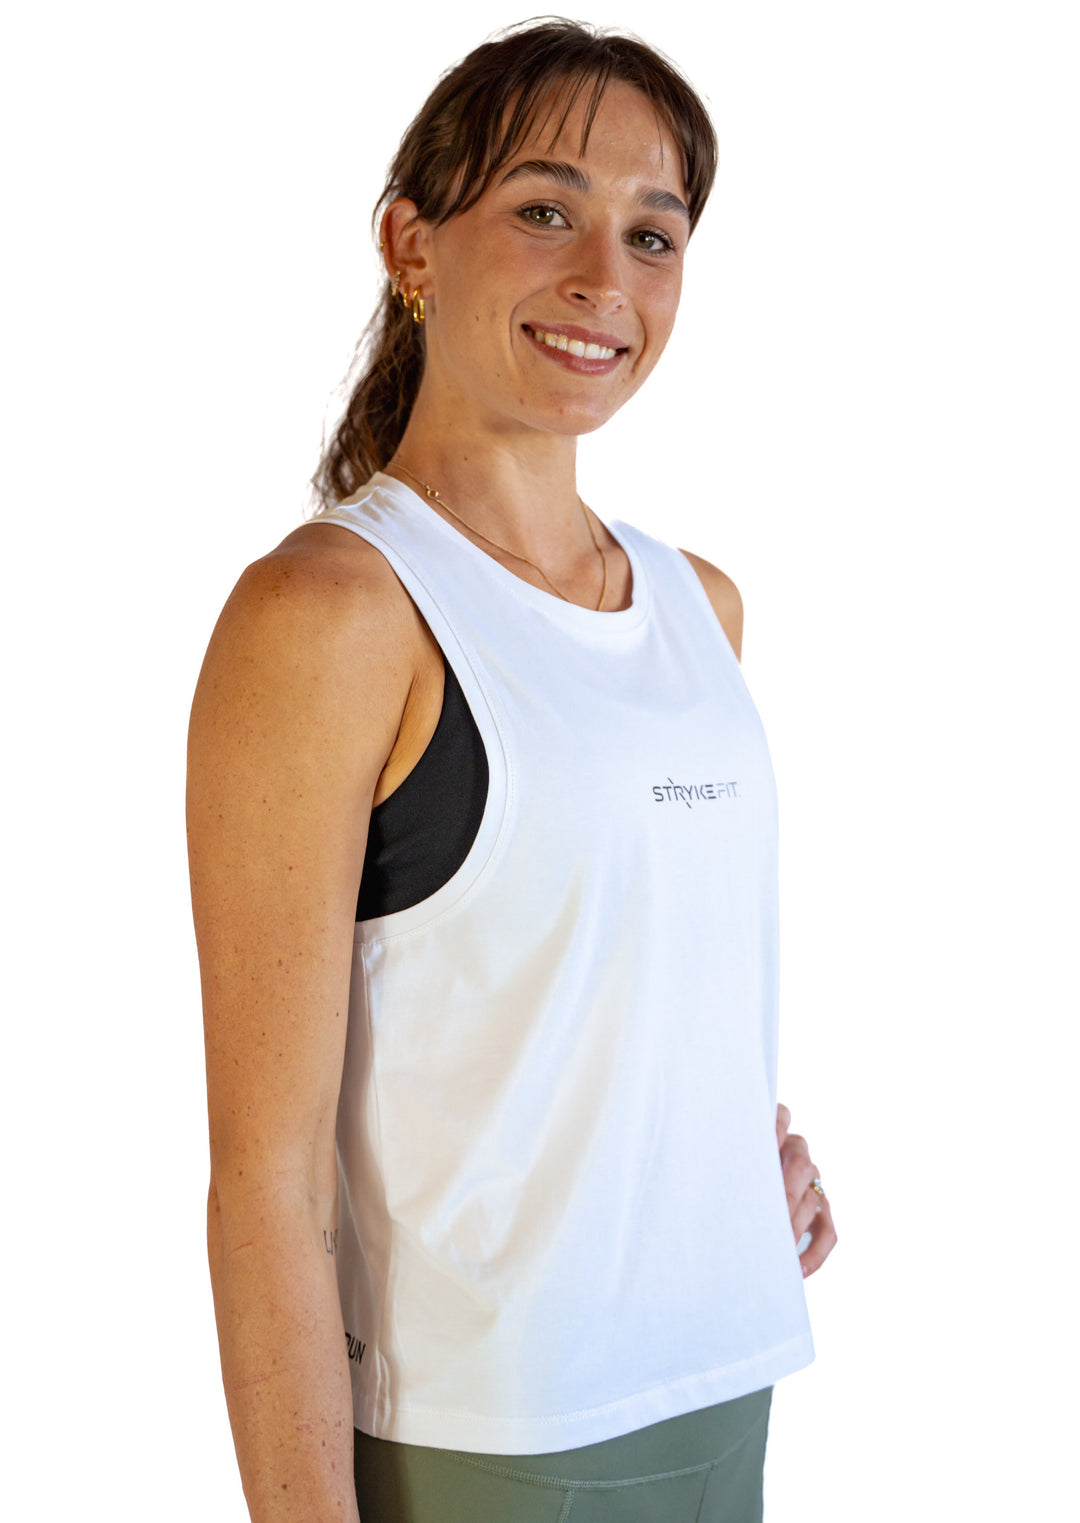 Our must have women's JOGGING SINGLET. If you're striving to achieve your personal goals, this is the singlet for you. Designed with wider shoulders for maximum comfort, it's here to support you every step of the way on your running journey.